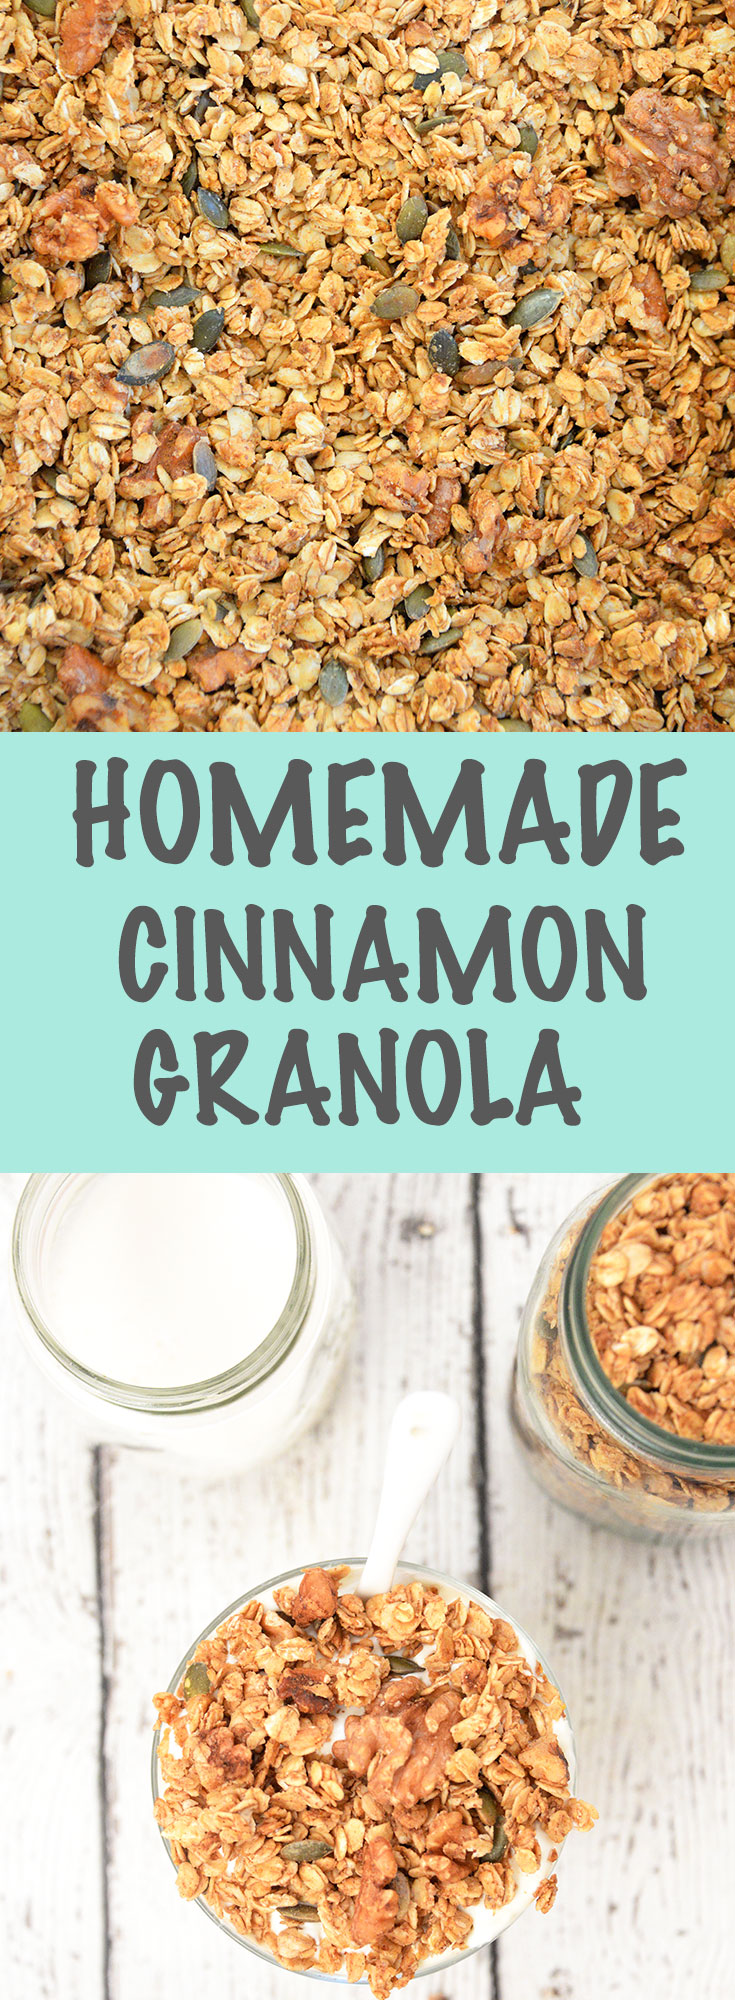 Homemade Cinnamon Maple Granola Parfait - start your day off with a healthy breakfast!